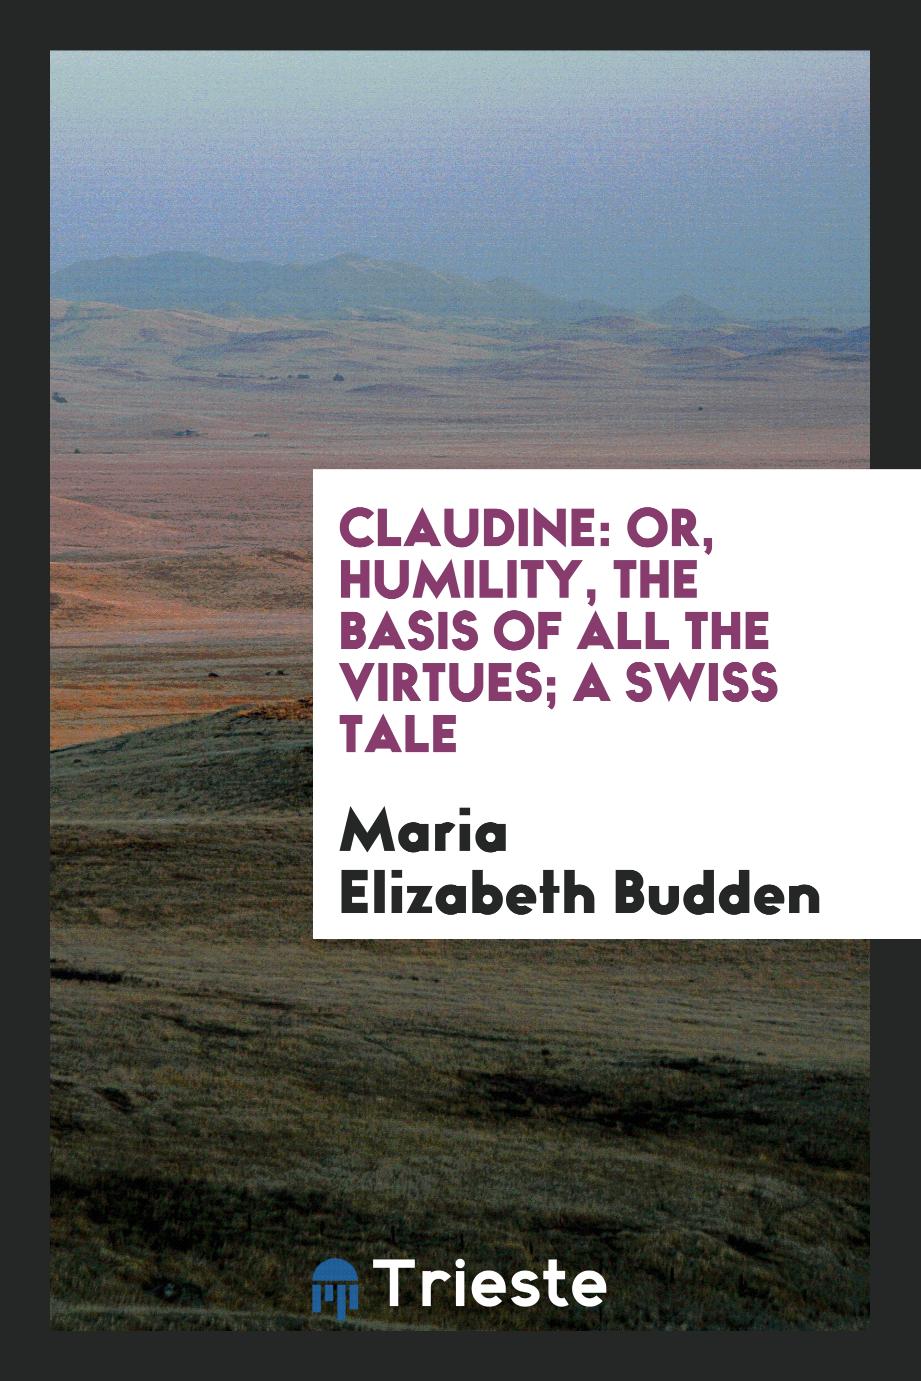 Claudine: or, Humility, the basis of all the virtues; a Swiss tale